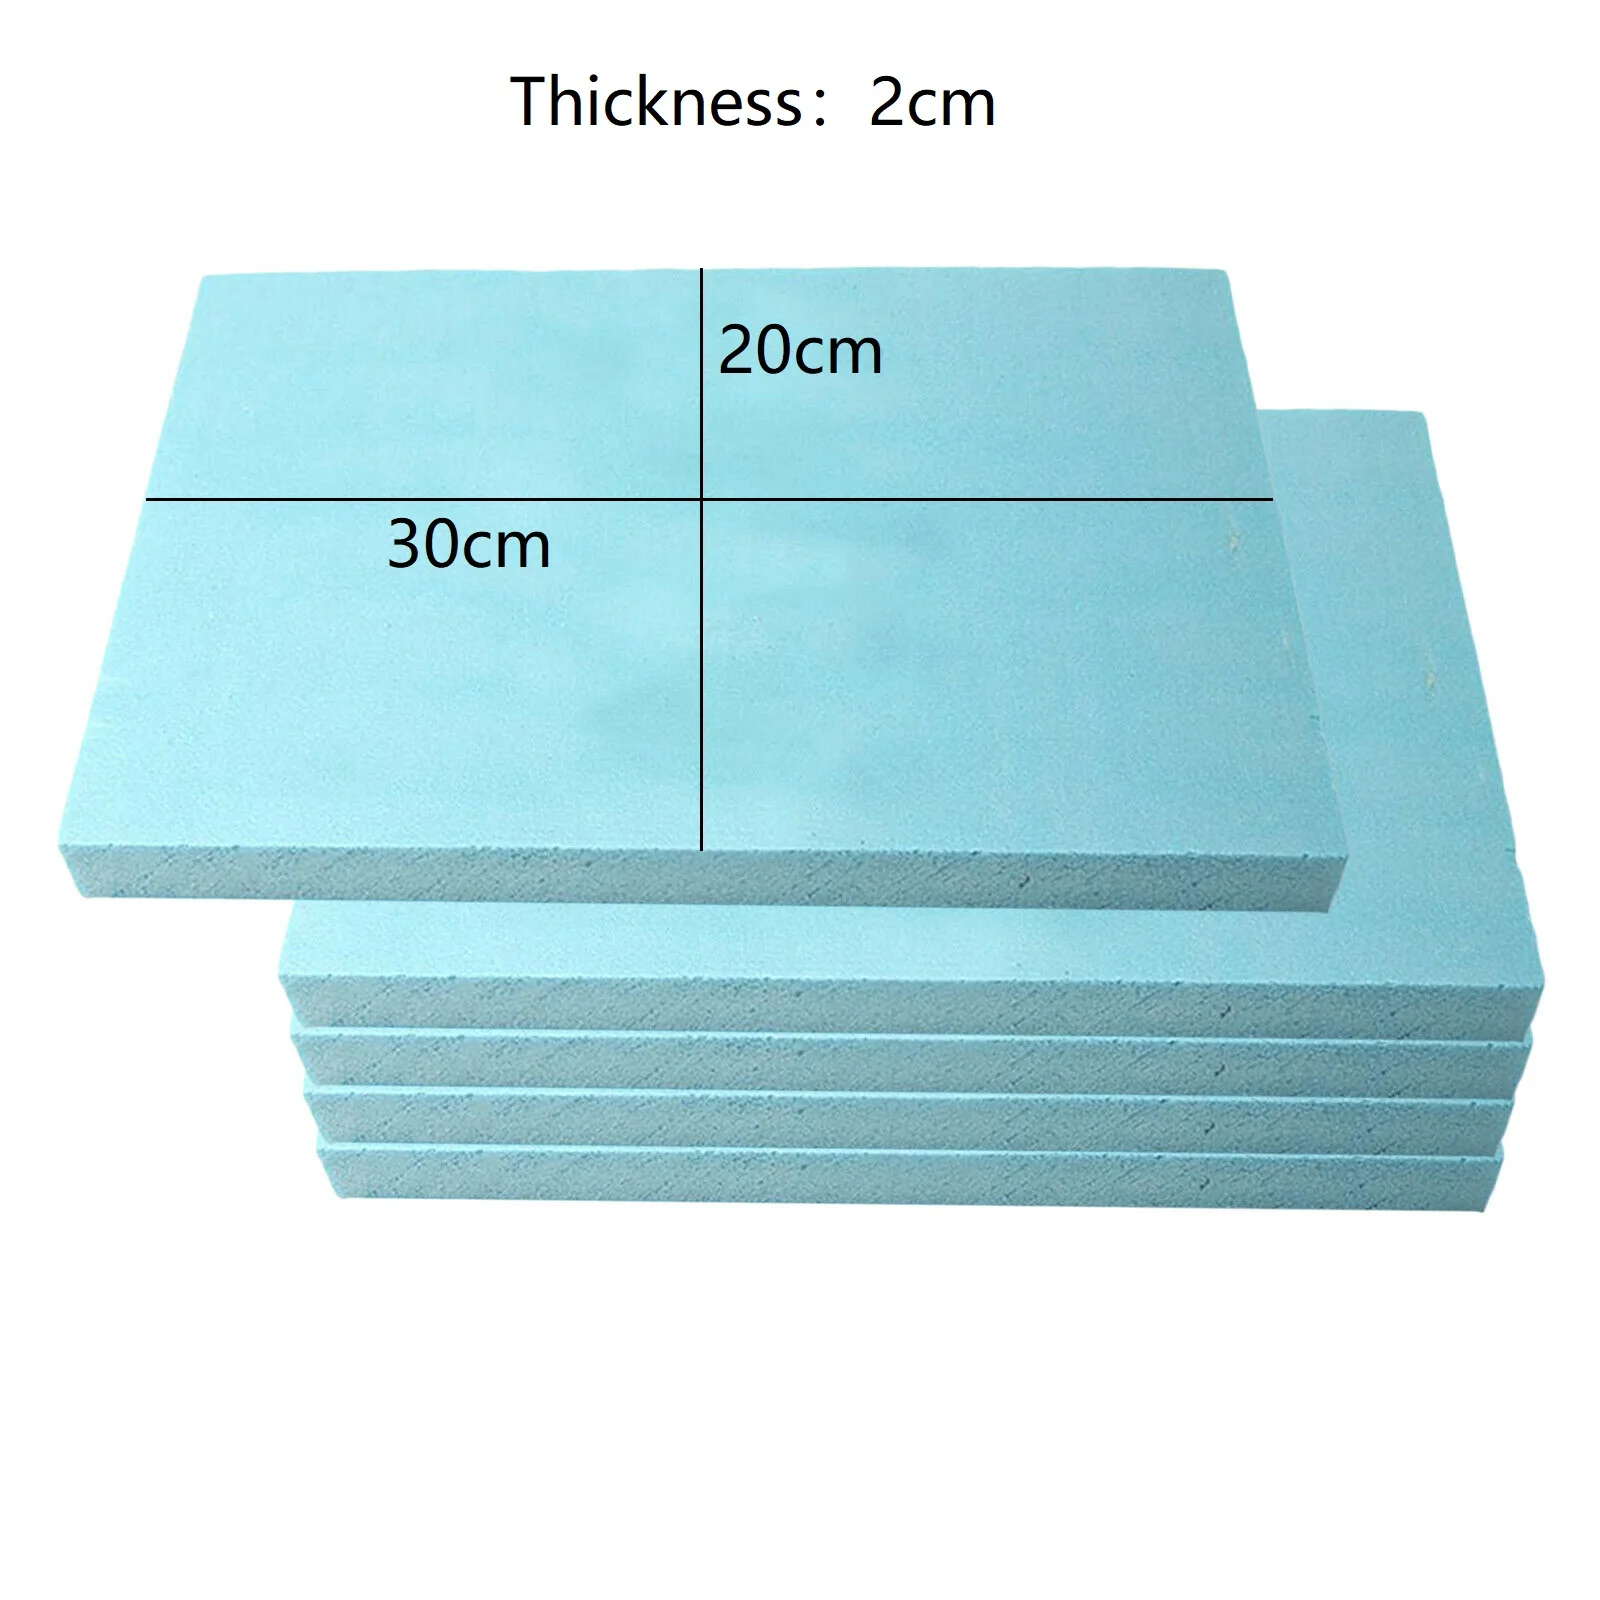 5 Pack Diorama Base Foam Blocks Modeling Material for Crafting Modeling Art Projects and Floral Arrangements